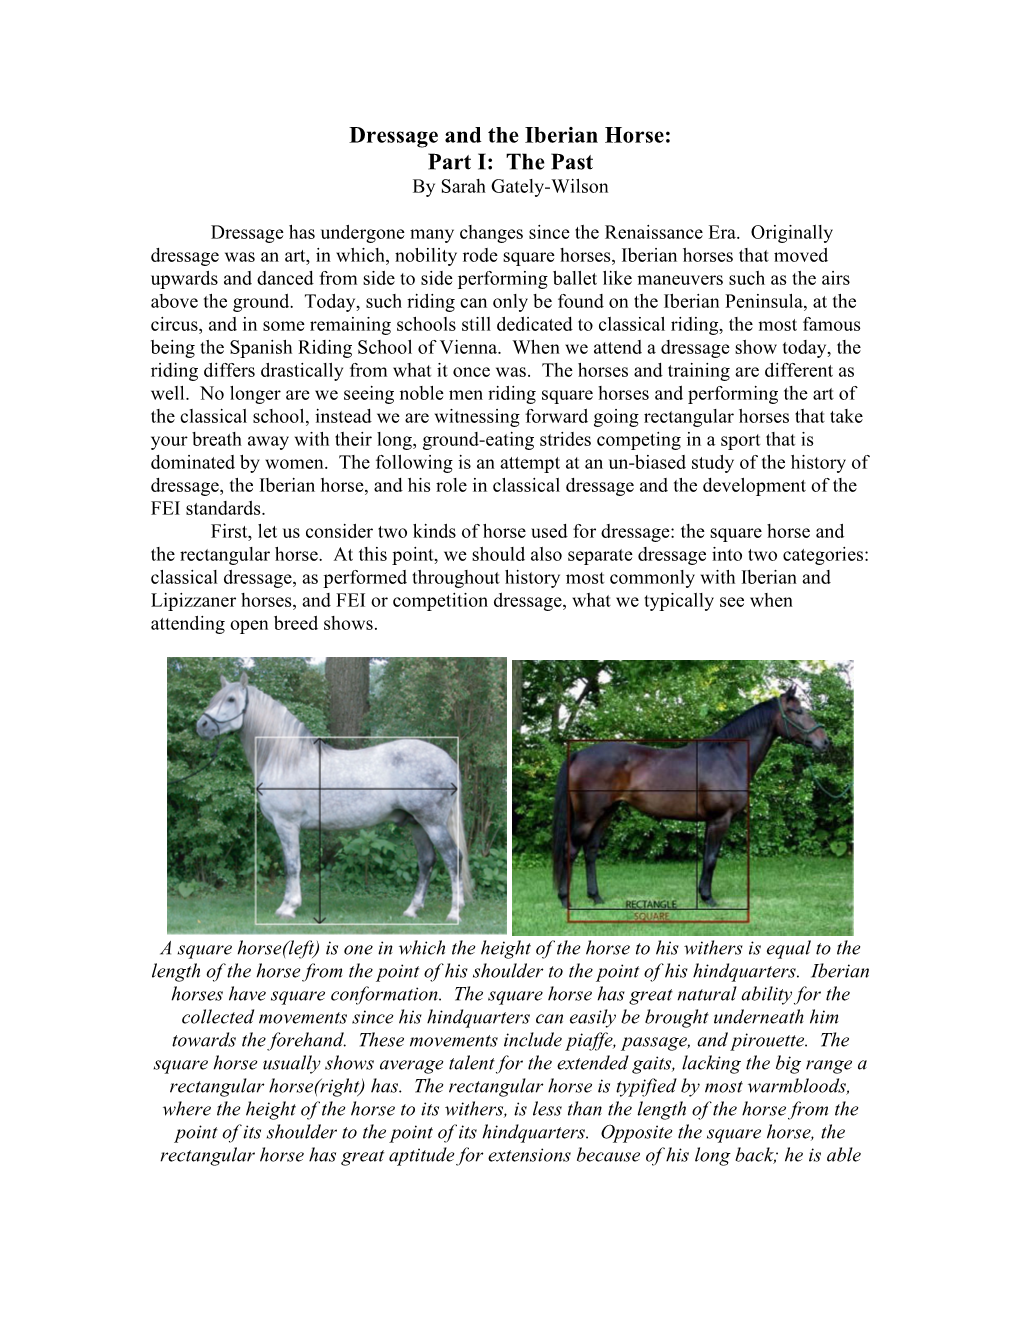 Dressage and the Iberian Horse: Part I: the Past by Sarah Gately-Wilson